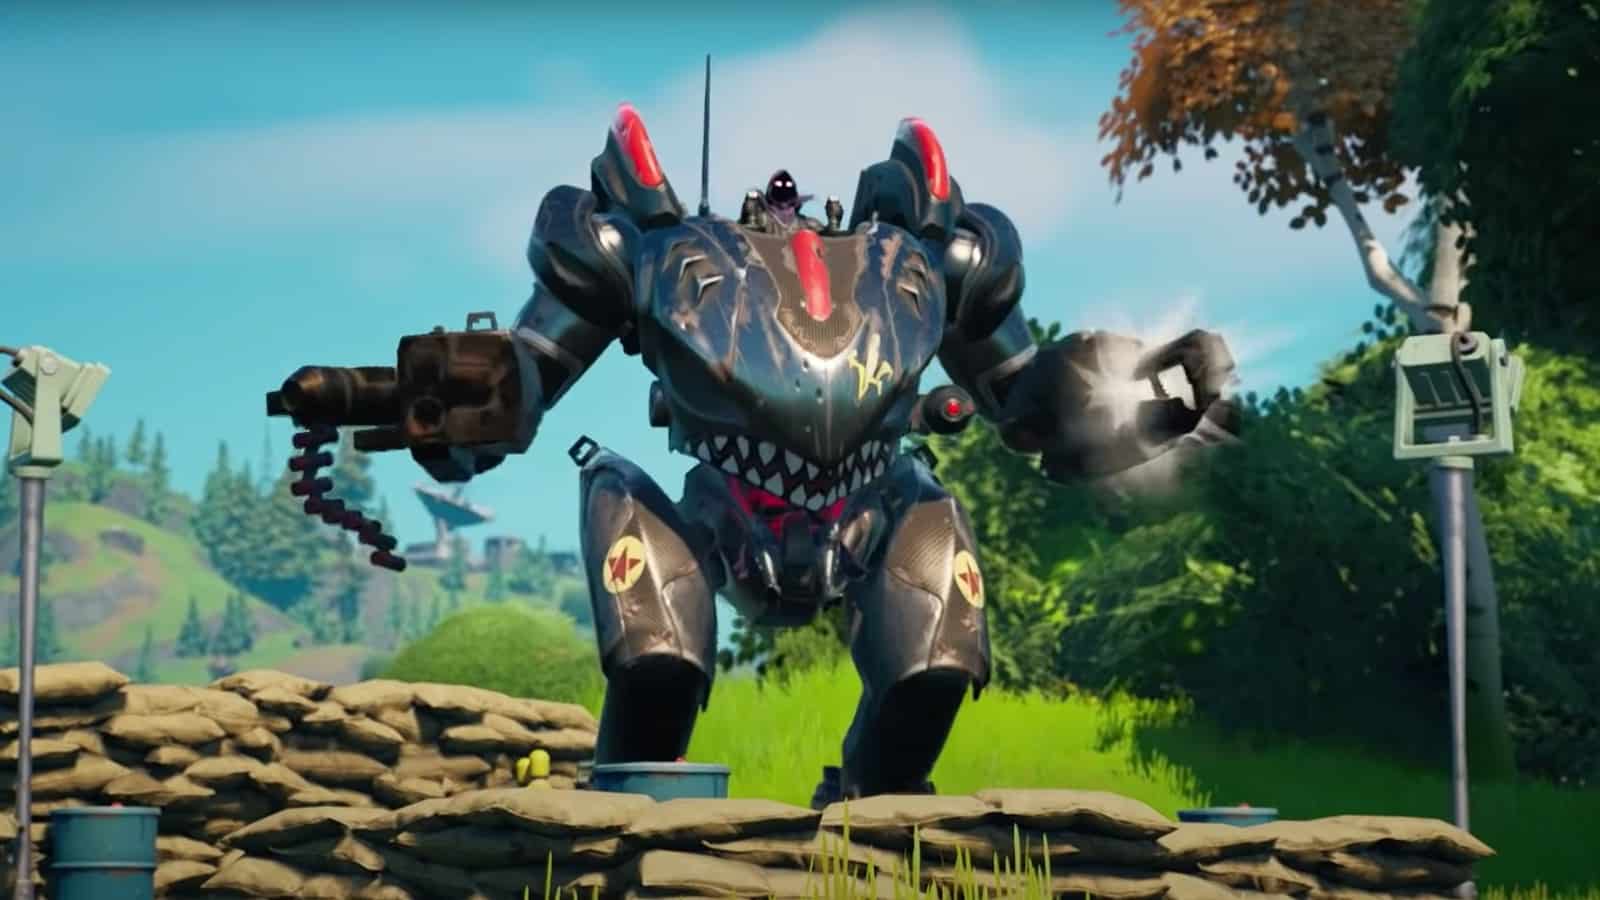 B.R.U.T.E. in Fortnite standing menacingly in front of the camera